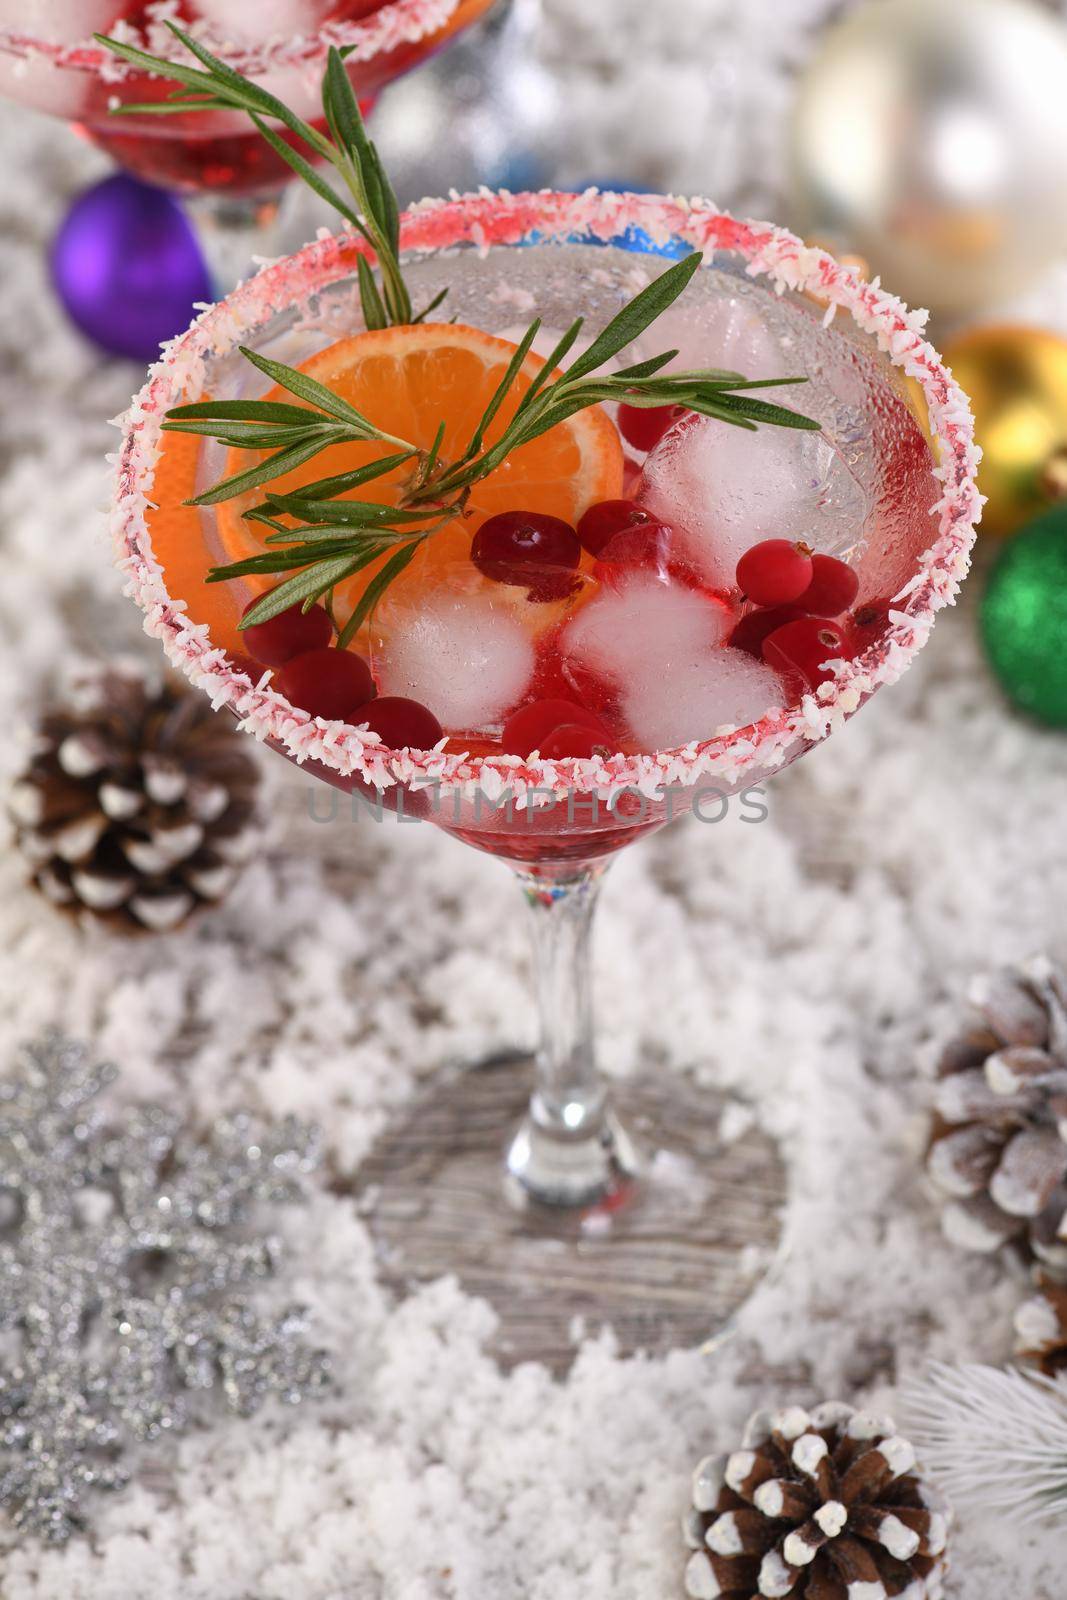  Christmas Cranberry margarita cocktail by Apolonia